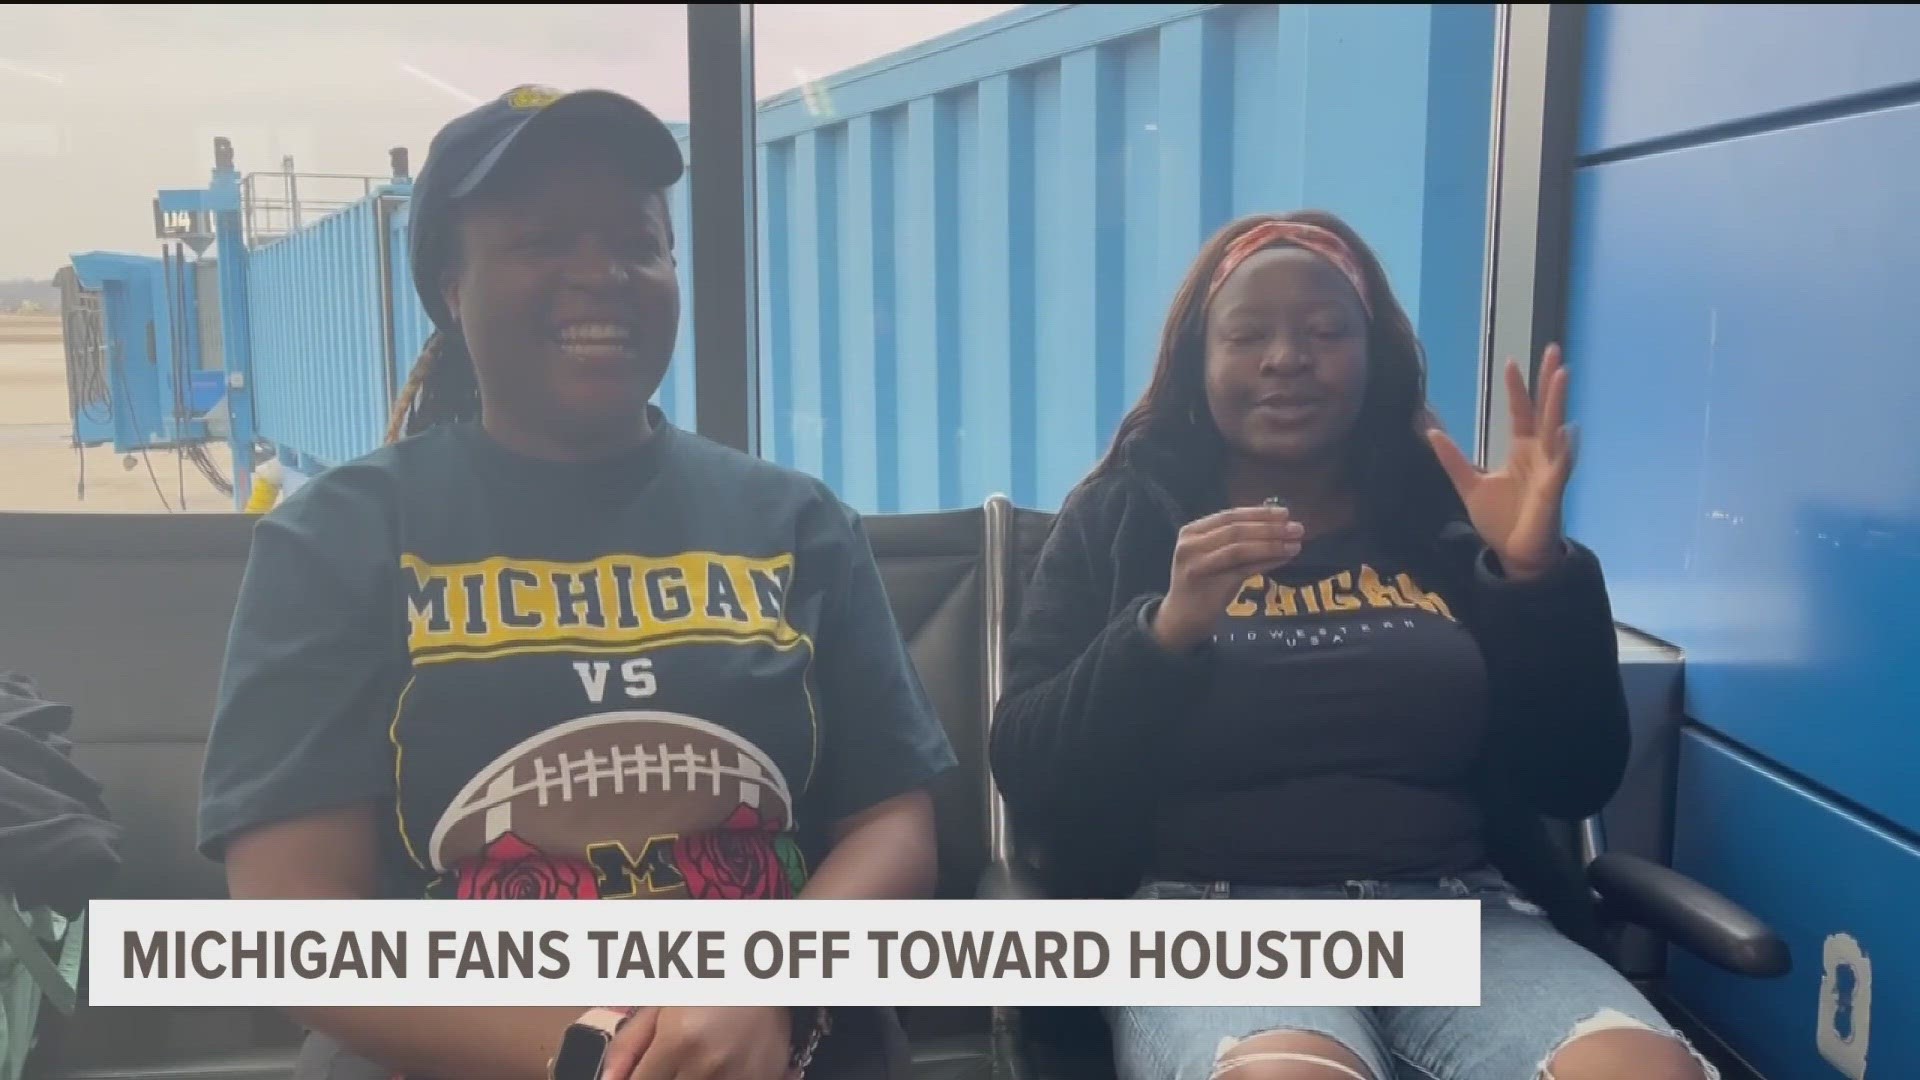 WTOL 11 caught up with Wolverine fans on their way from Detroit to Houston.